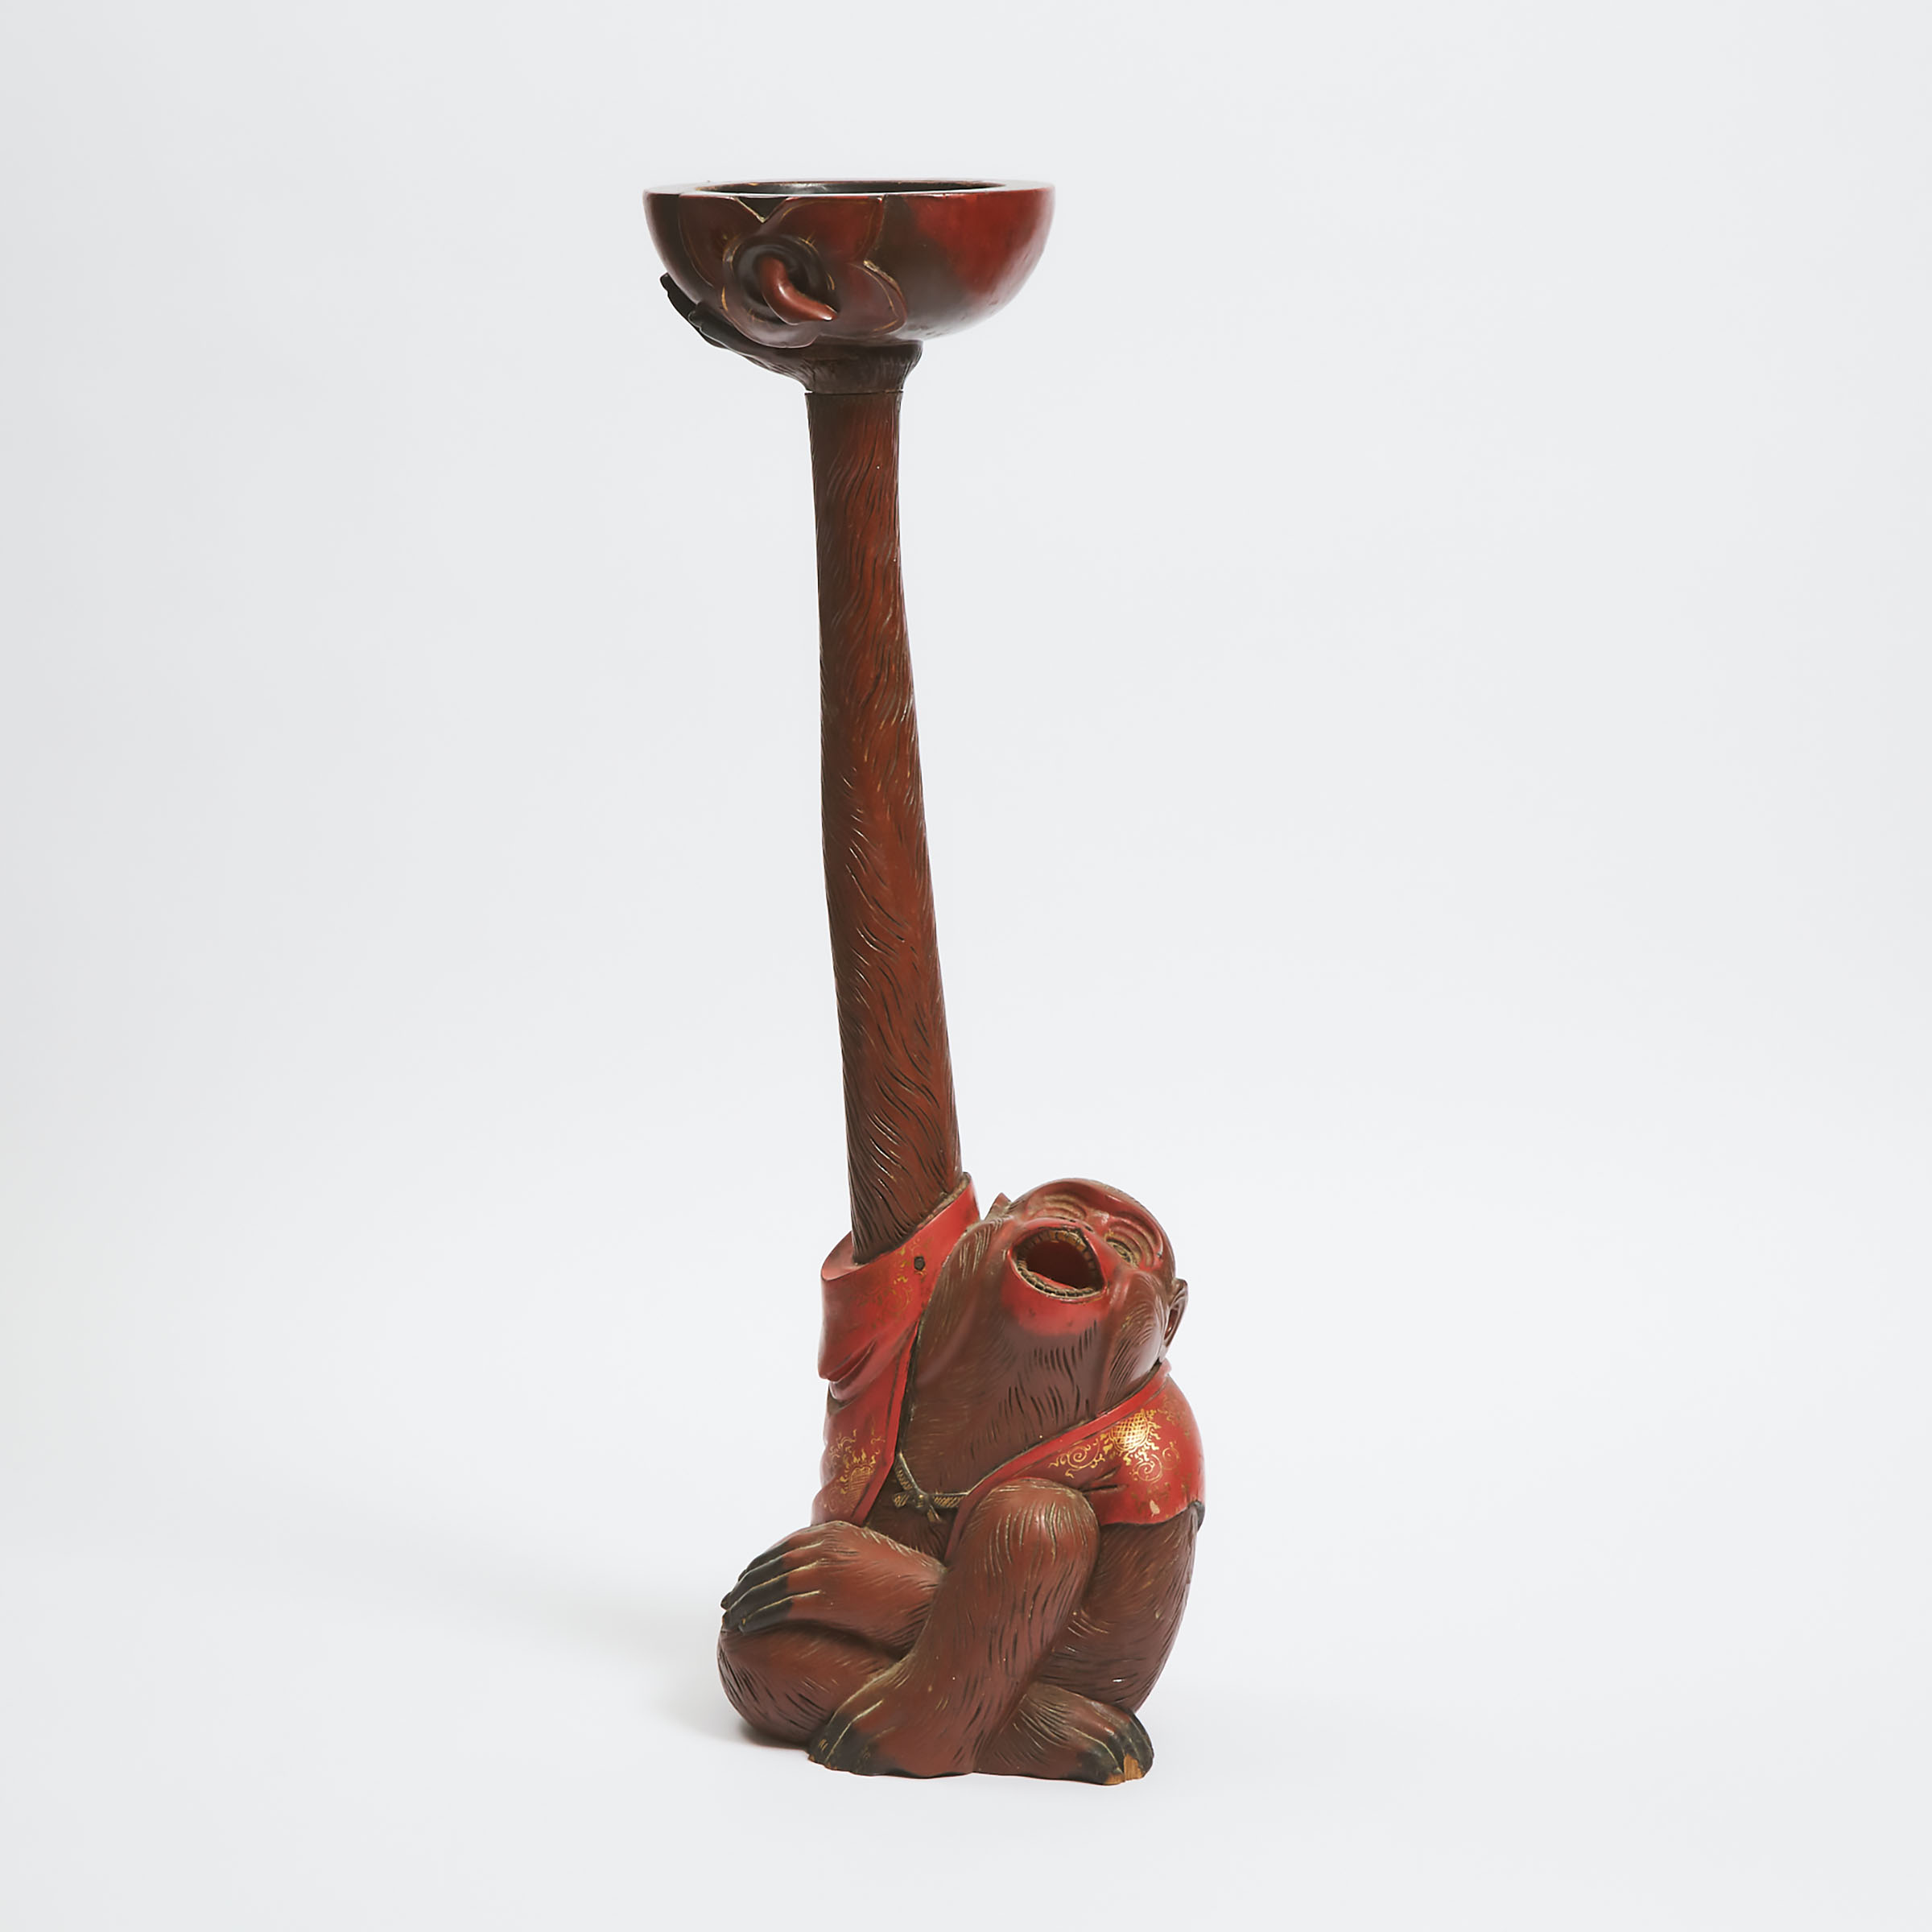 A Large Japanese Red Lacquered Wood Candlestick in the Form of a Monkey